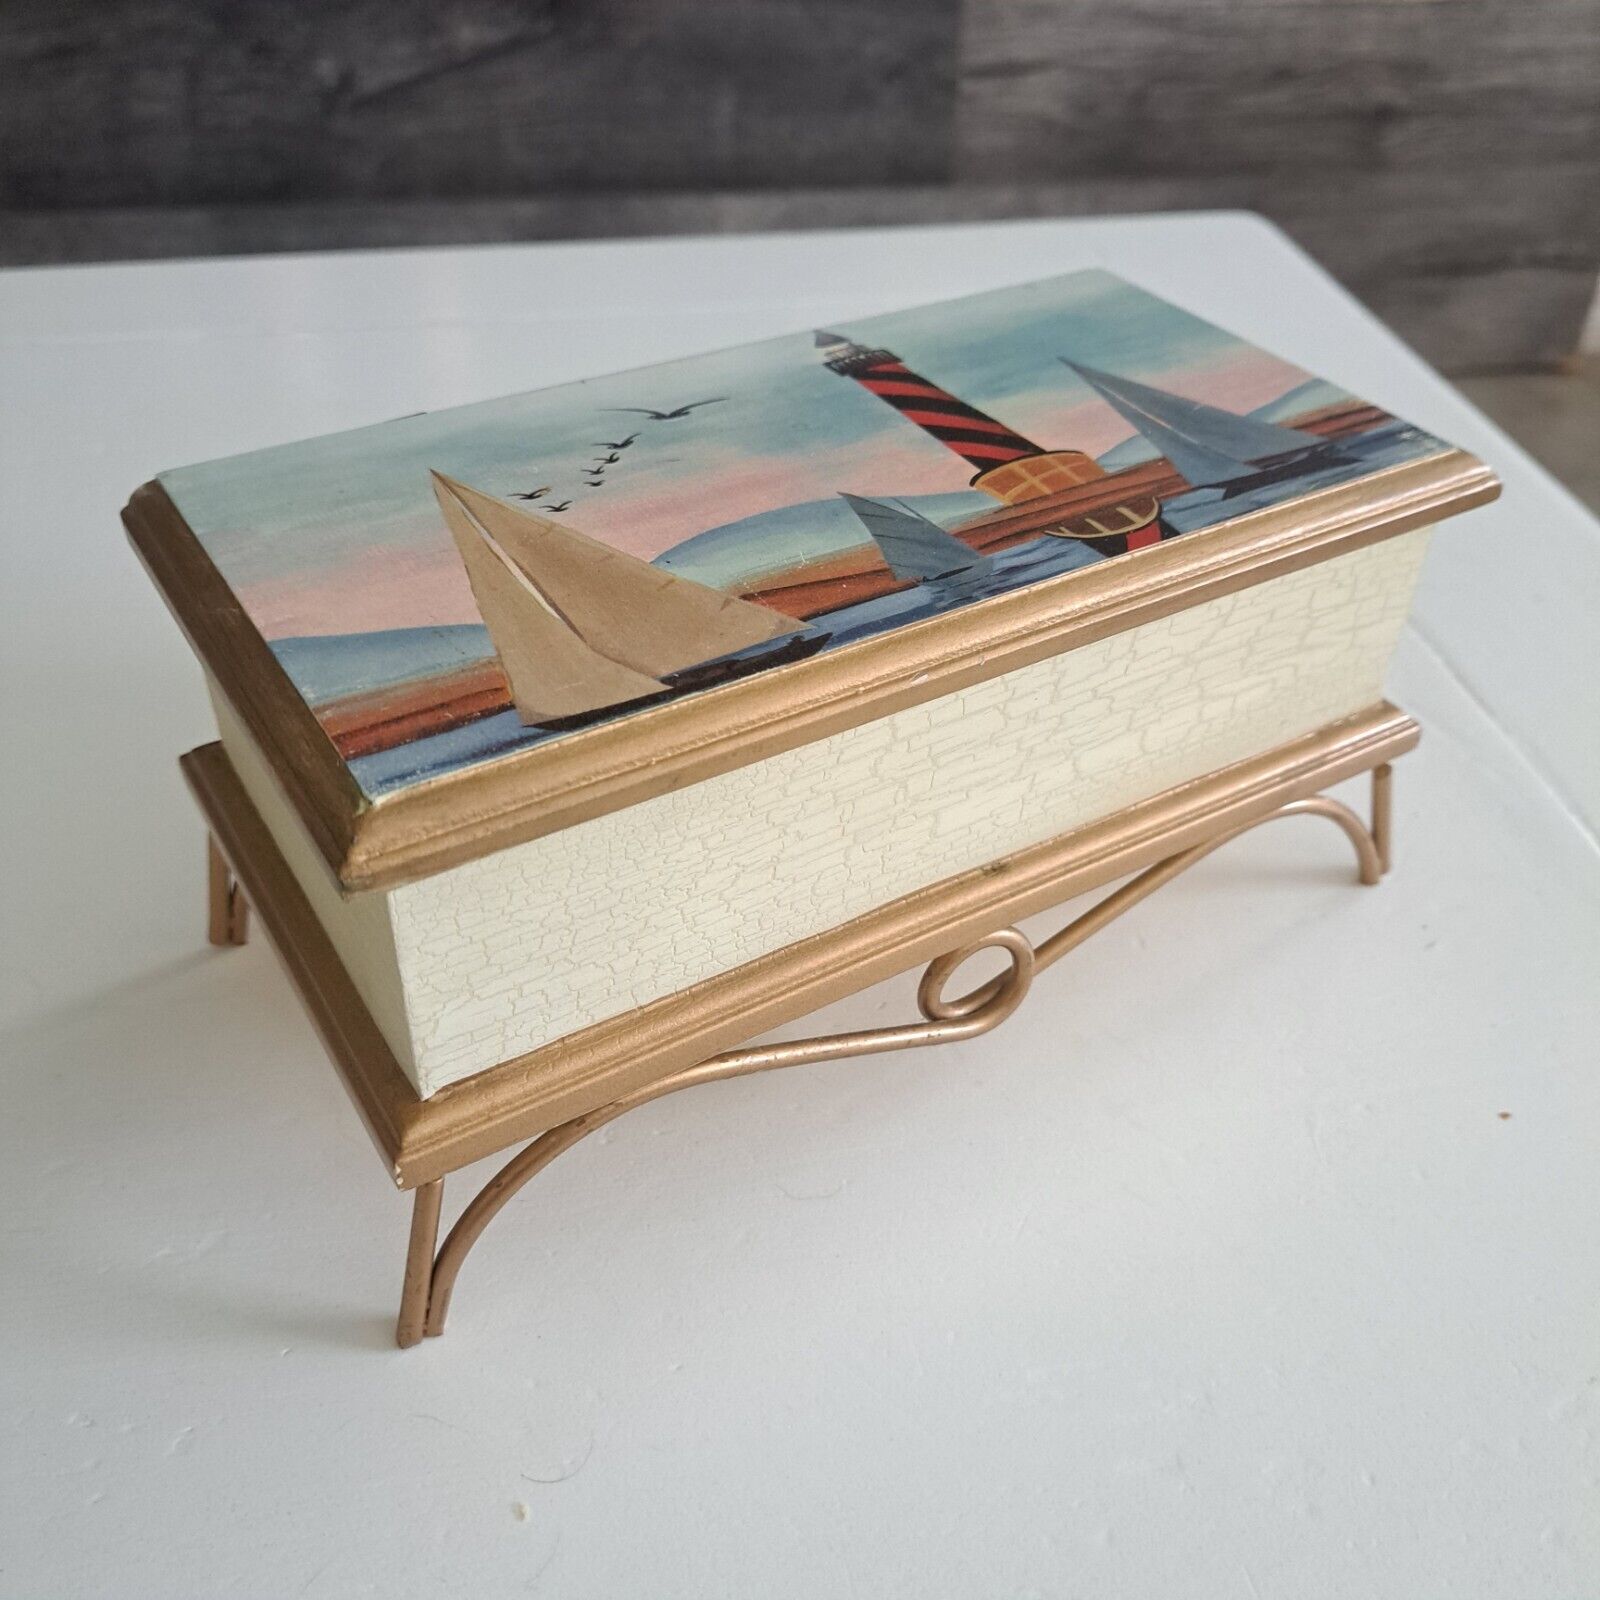 Arister Gifts Inc Beach Sailboats And Lighthouse Wooden Box